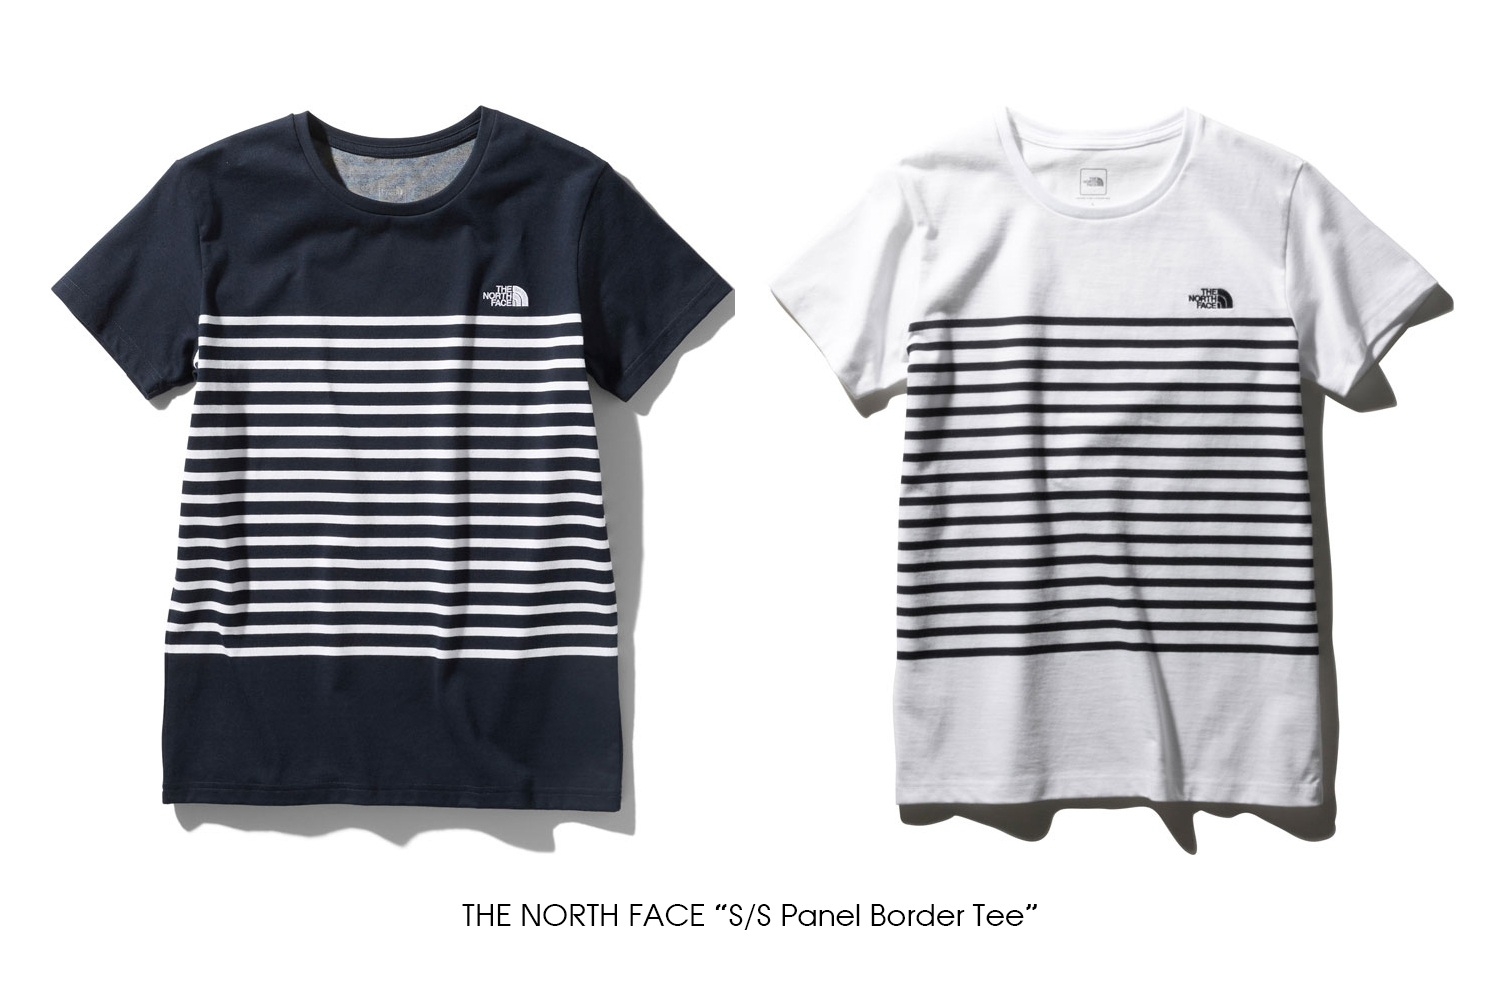 THE NORTH FACE "S/S Panel Border Tee"